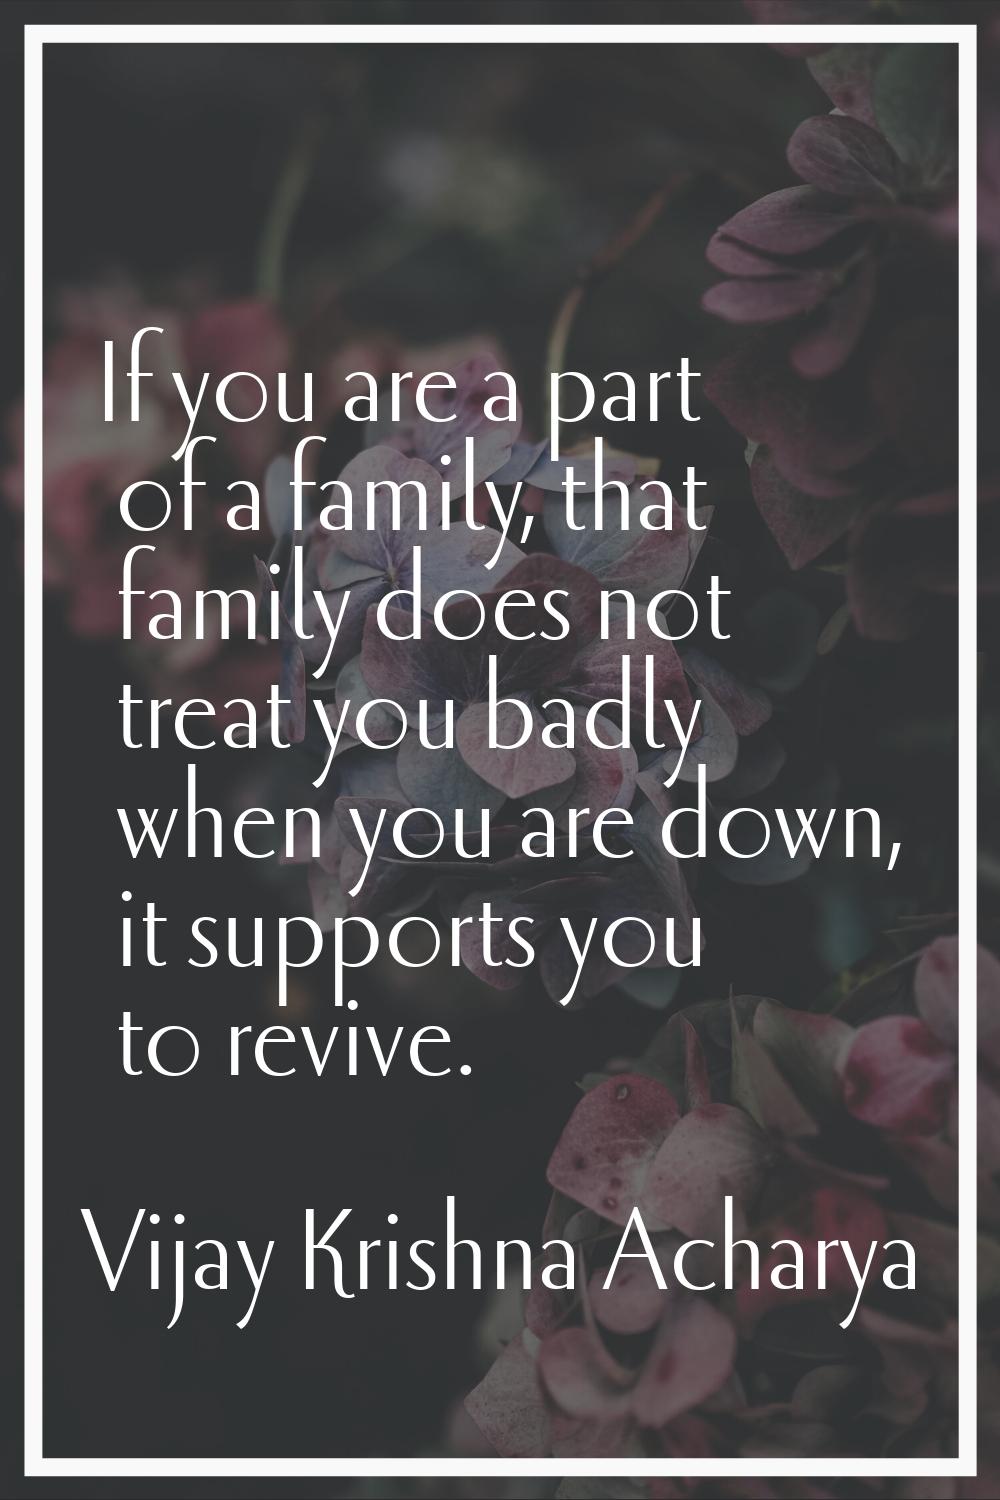 If you are a part of a family, that family does not treat you badly when you are down, it supports 